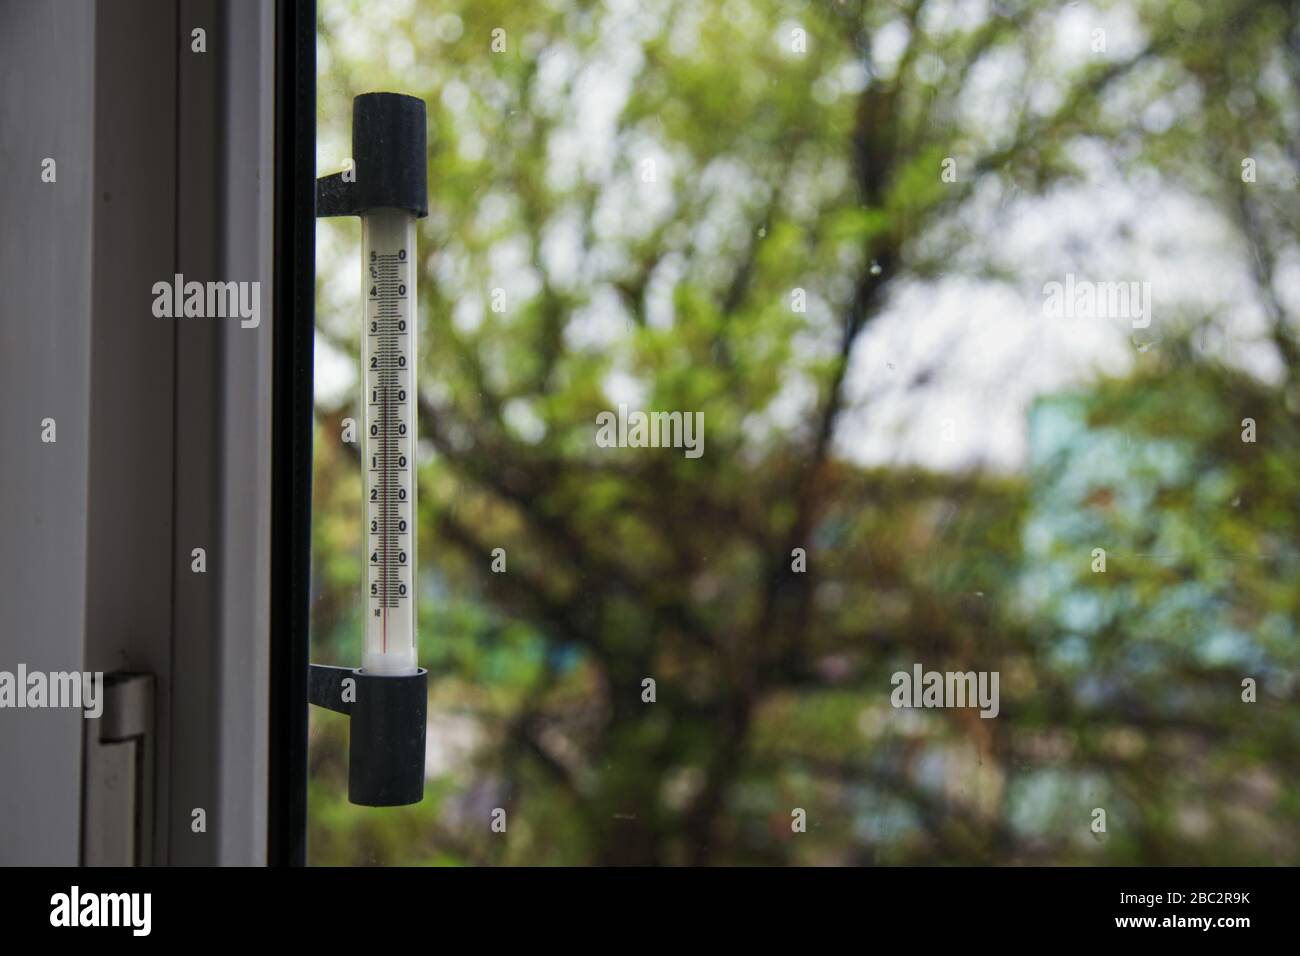 https://c8.alamy.com/comp/2BC2R9K/glass-liquid-window-thermometer-showing-outdoor-temperature-calibrated-in-degrees-celsius-and-attached-to-the-outside-of-the-window-blurred-backgrou-2BC2R9K.jpg